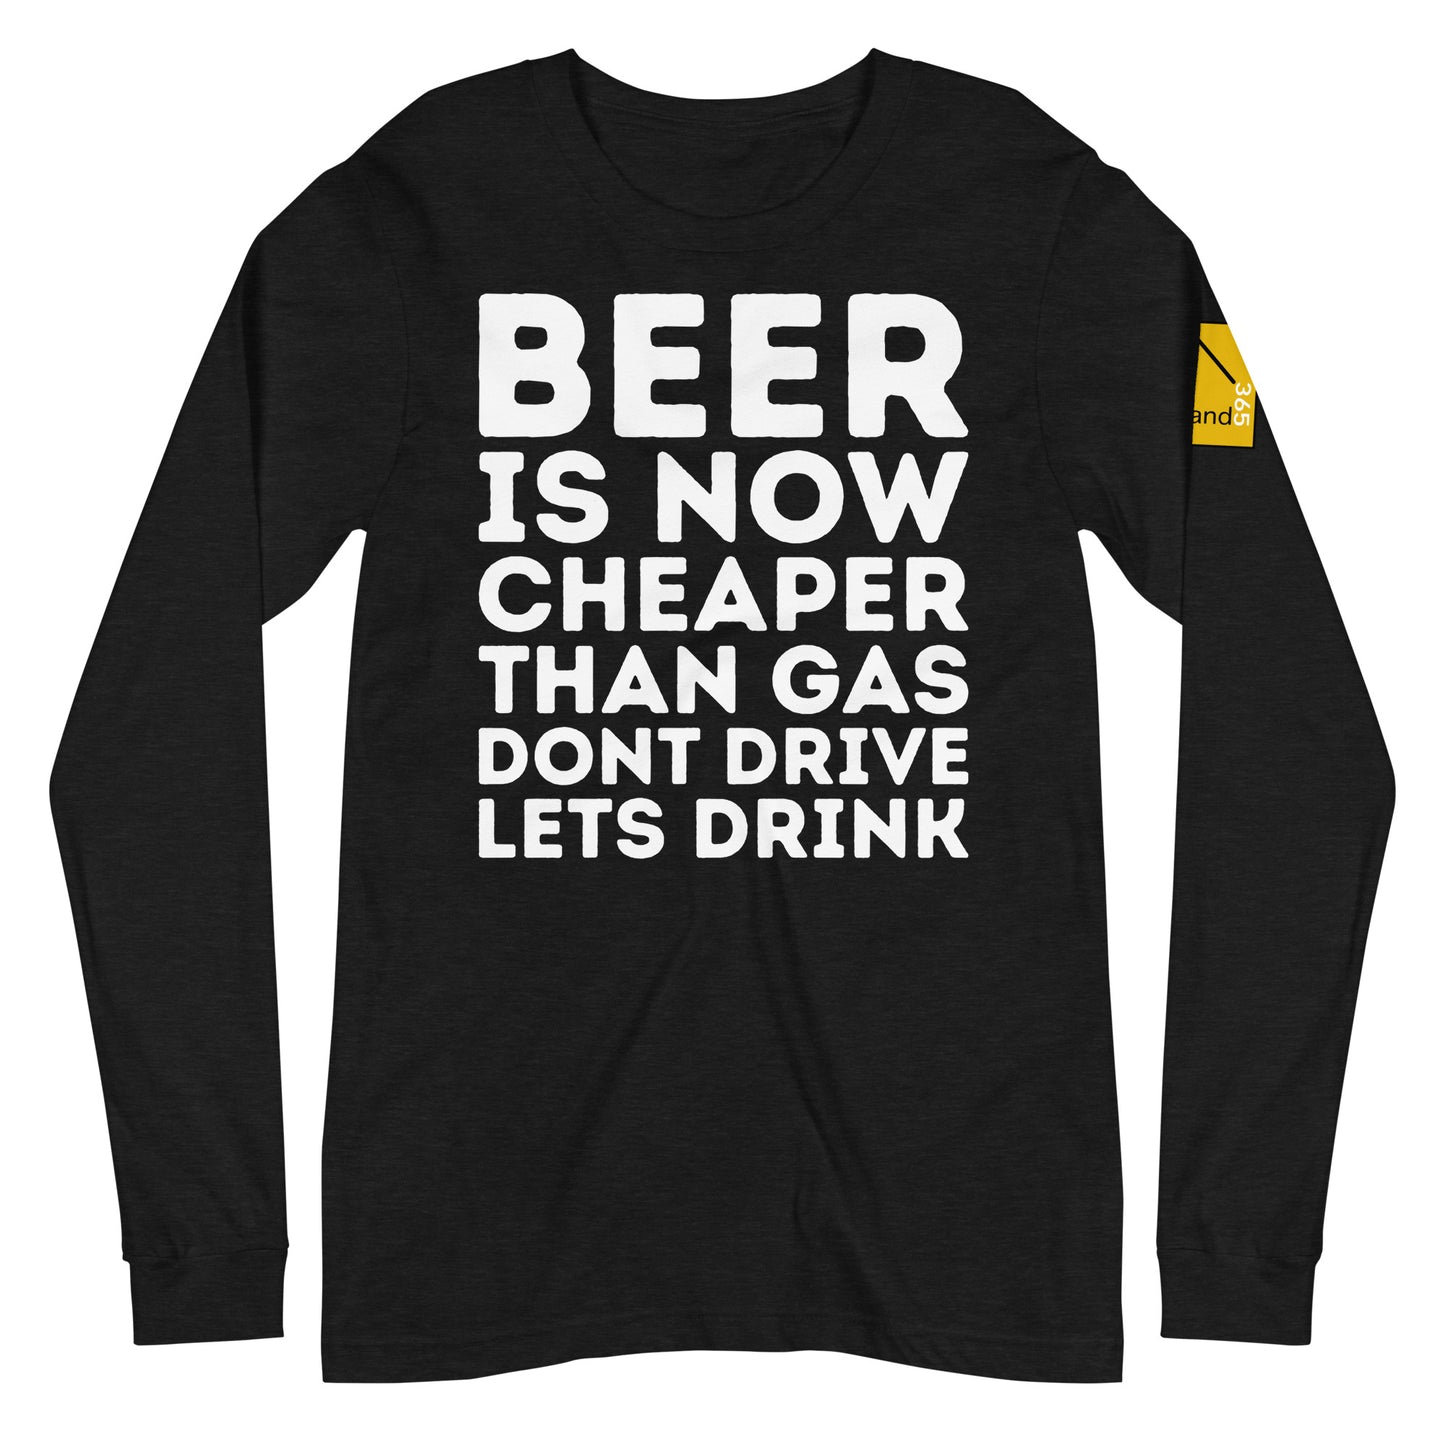 "BEER IS NOW CHEAPER THAN GAS. DONT DRIVE. LETS DRINK."  Black Long-sleeve. overland365.com